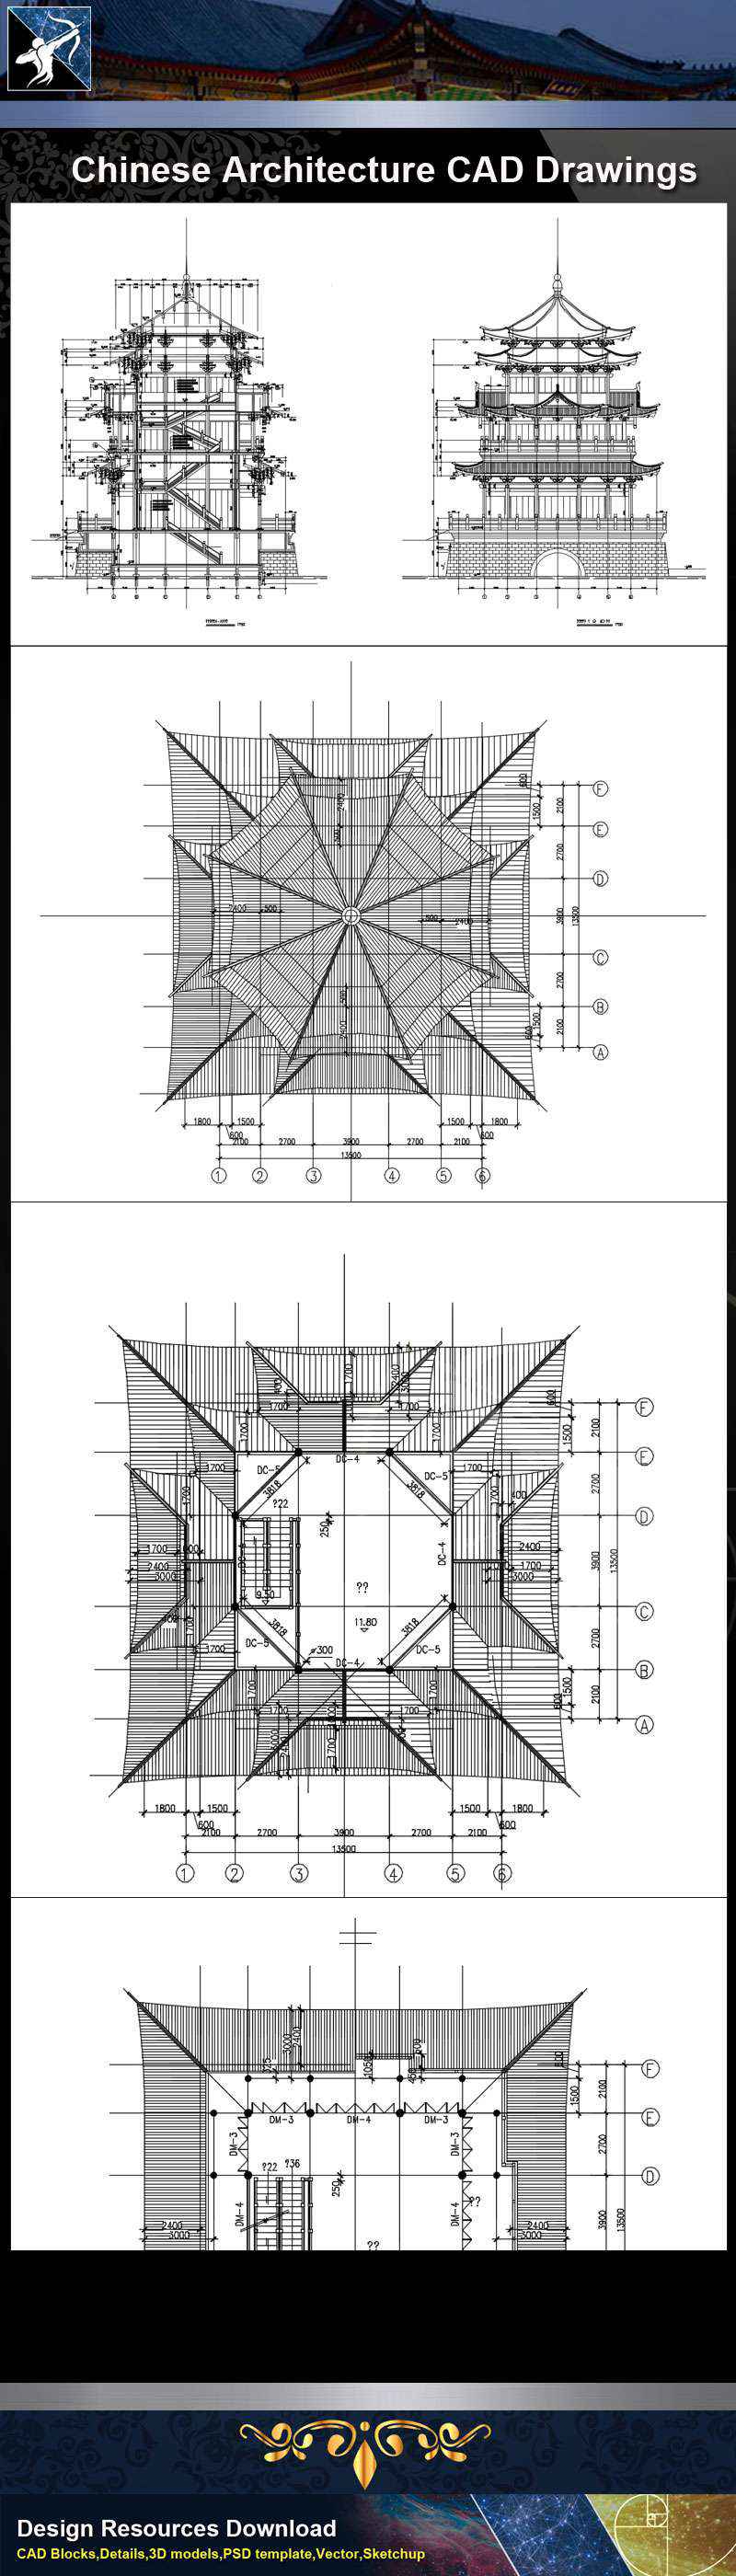 ★【Chinese Architecture CAD Drawings】@Chinese Tower Drawings,CAD Details,Elevation